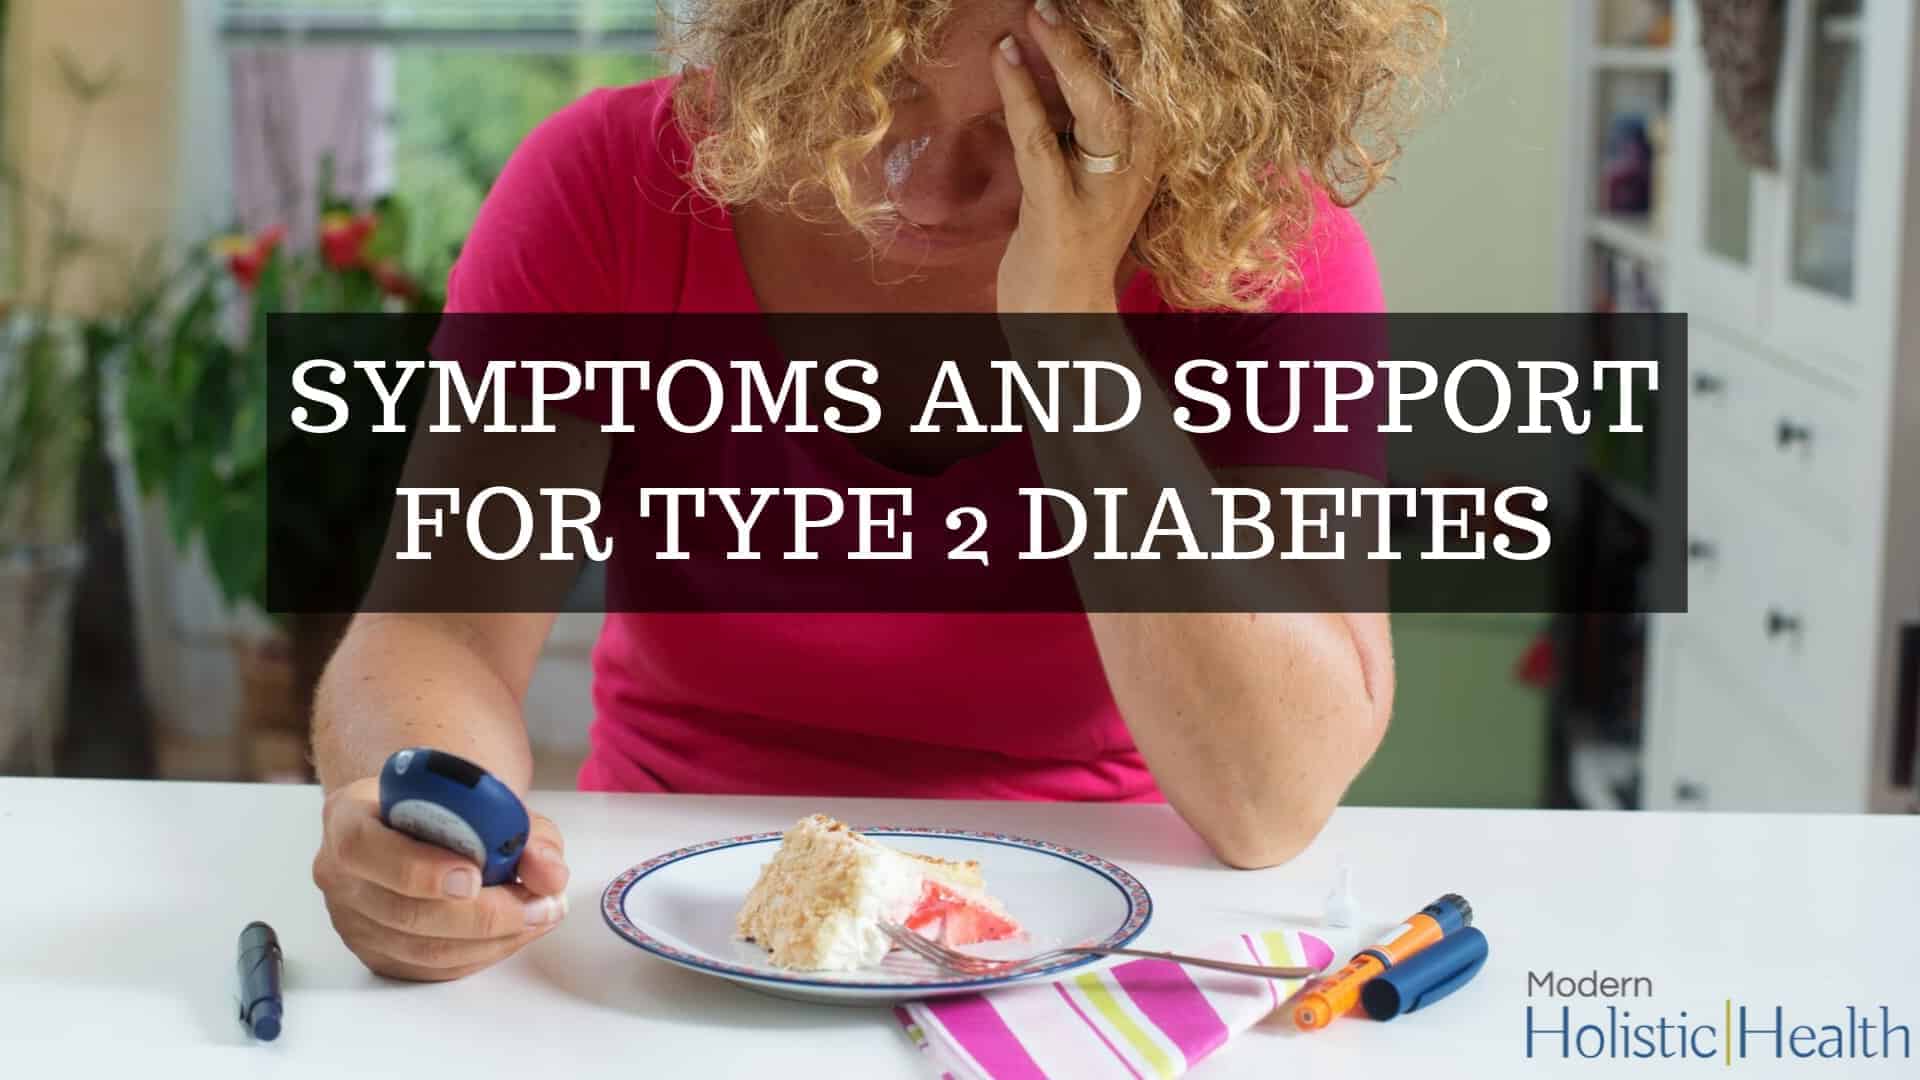 Symptoms and Support for Type 2 Diabetes